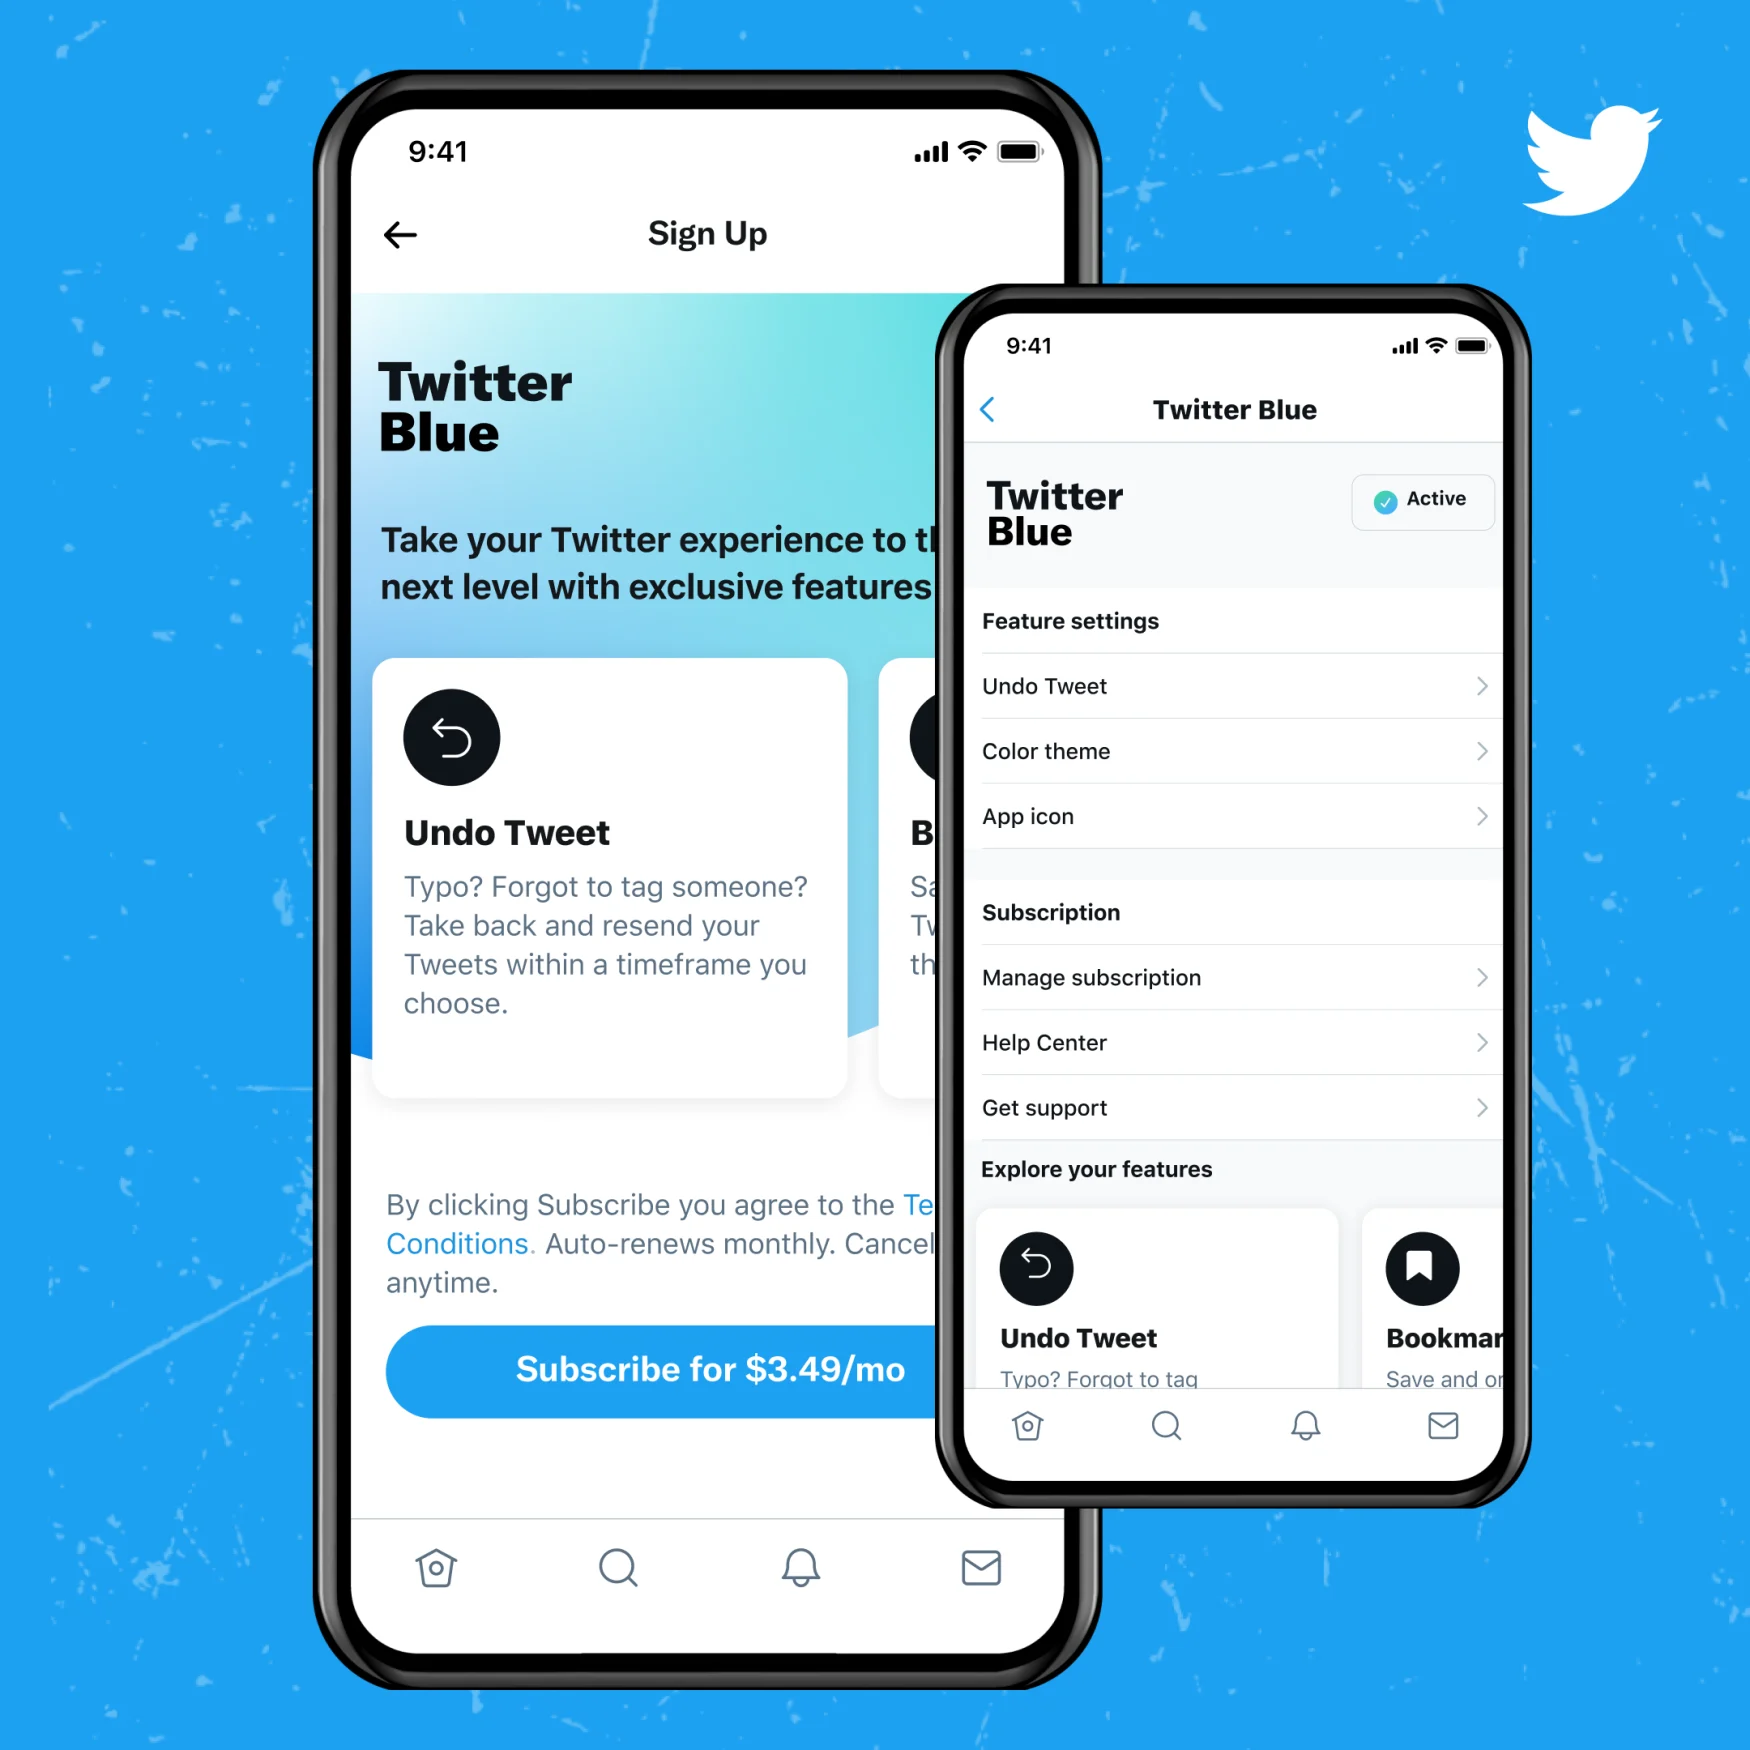 Twitter is introducing a subscription for 